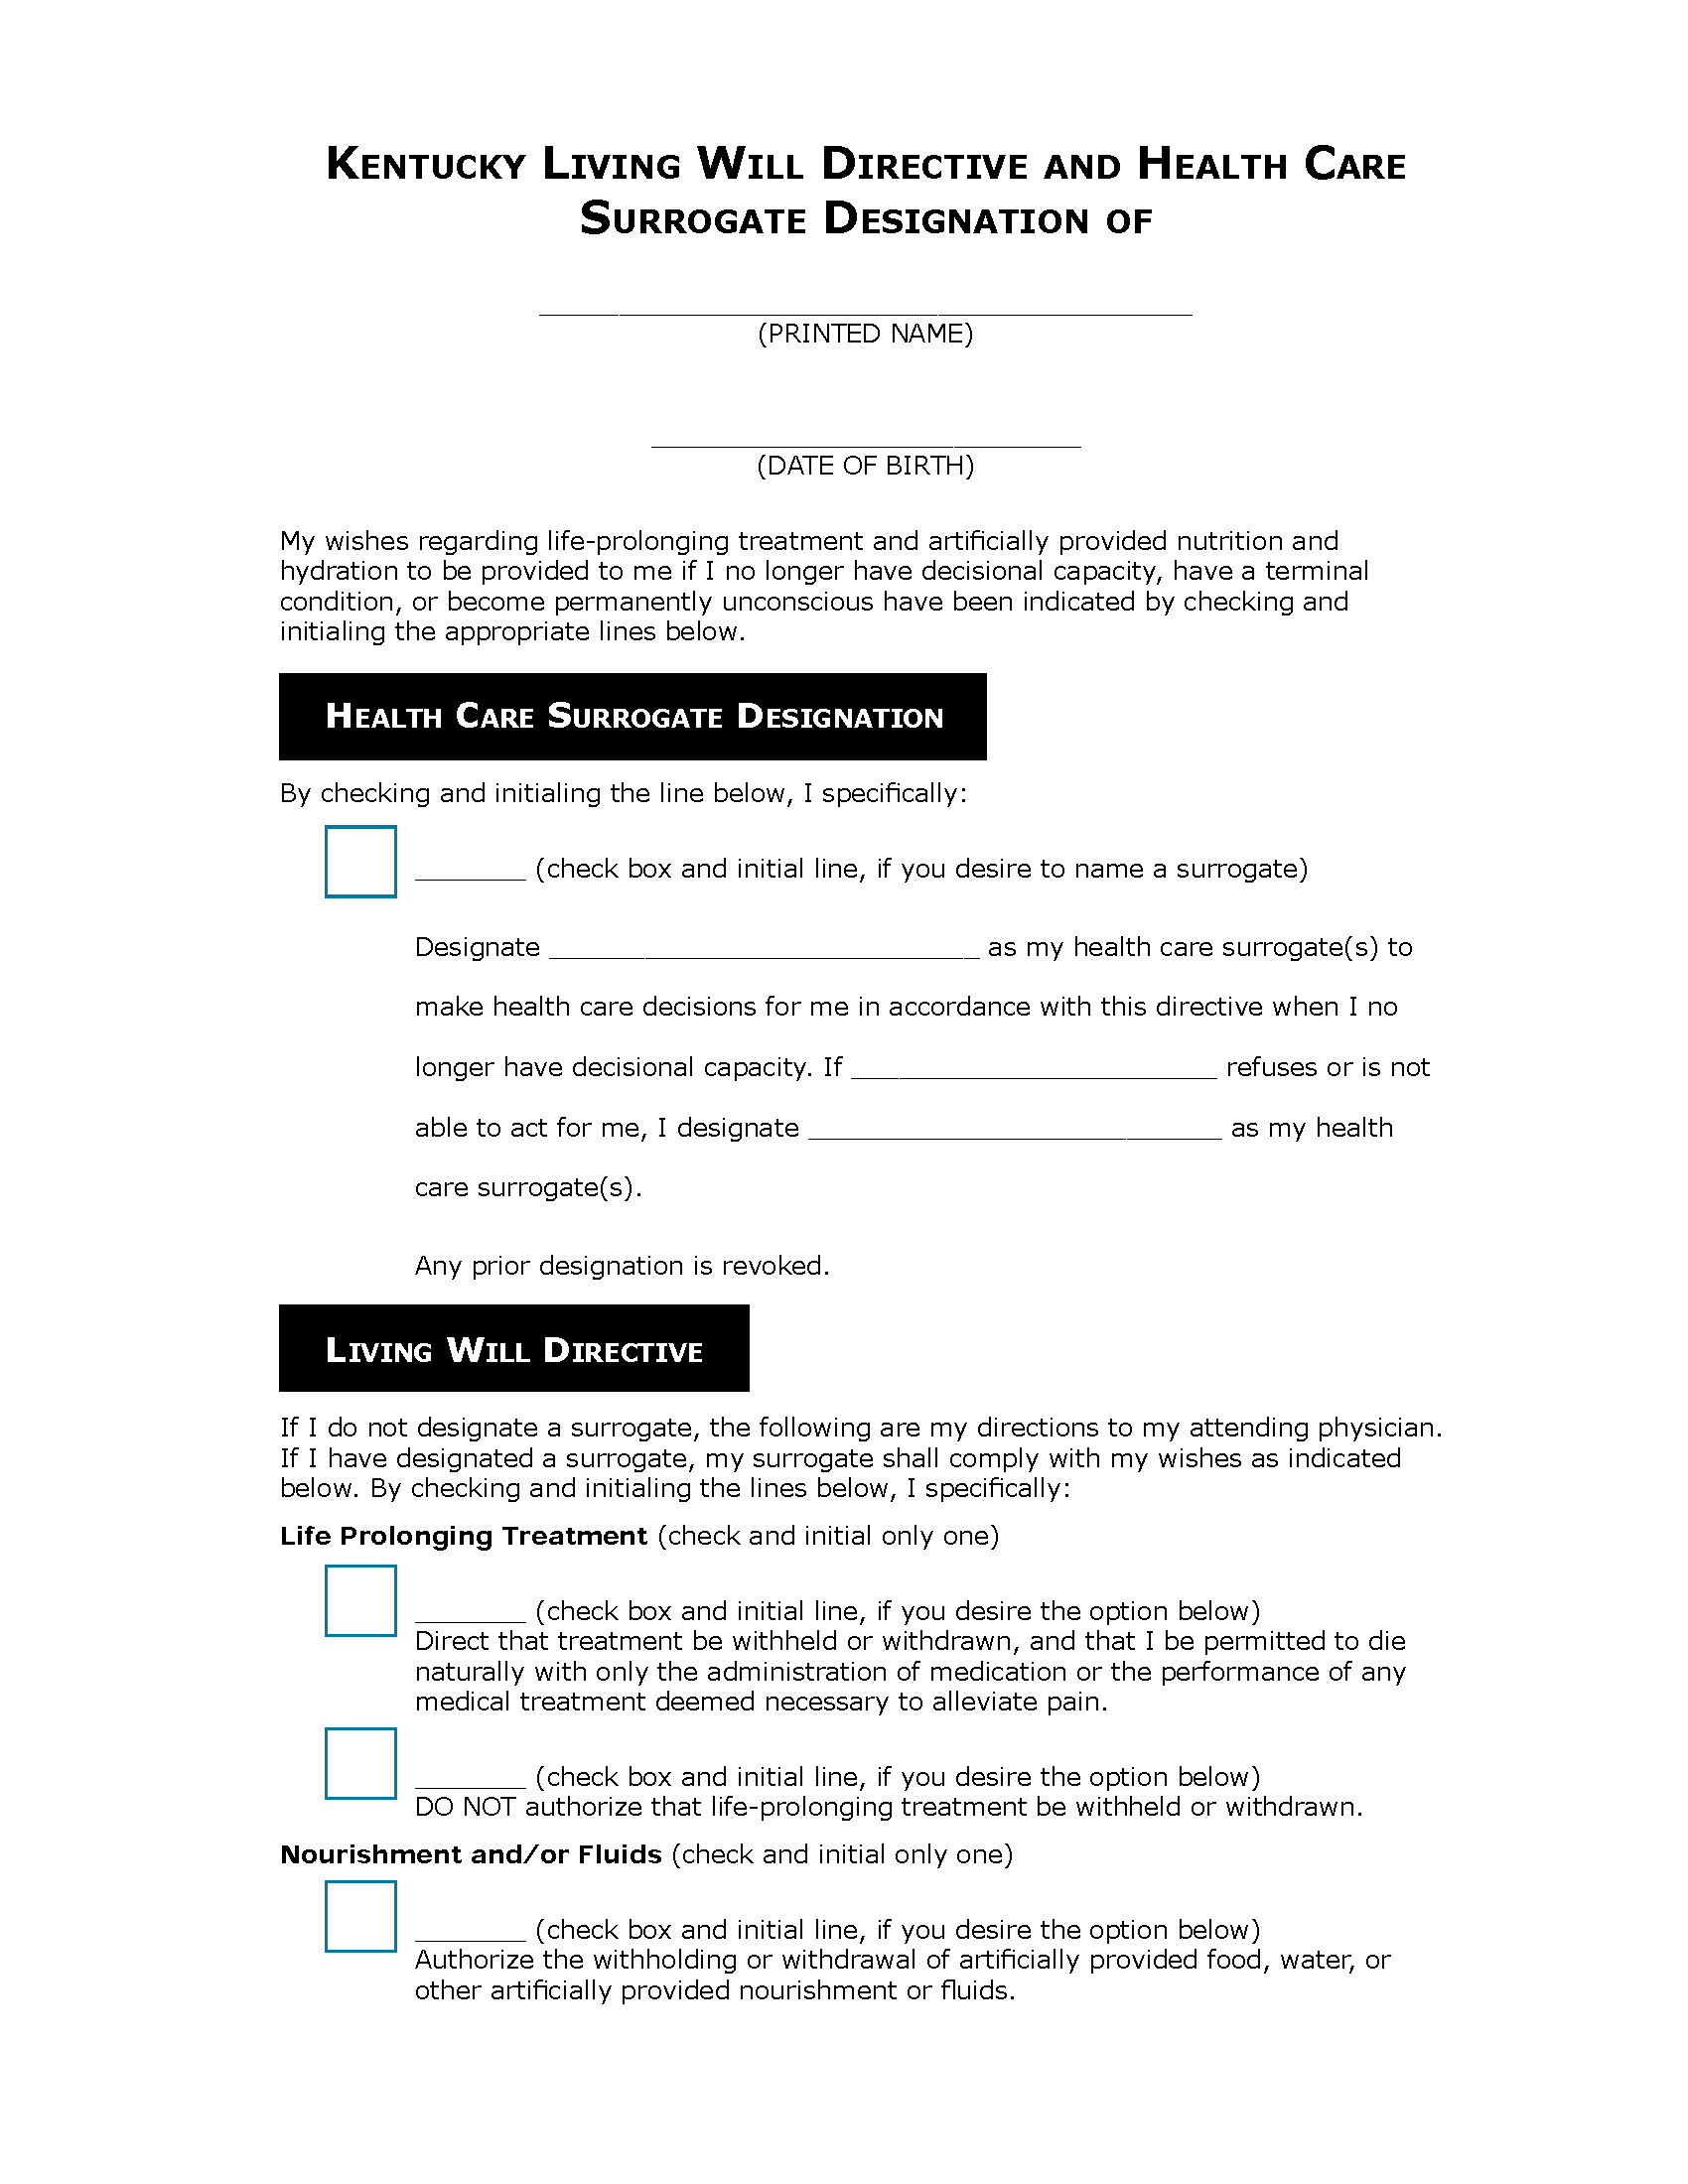 kentucky-medical-power-of-attorney-pdf-free-printable-legal-forms